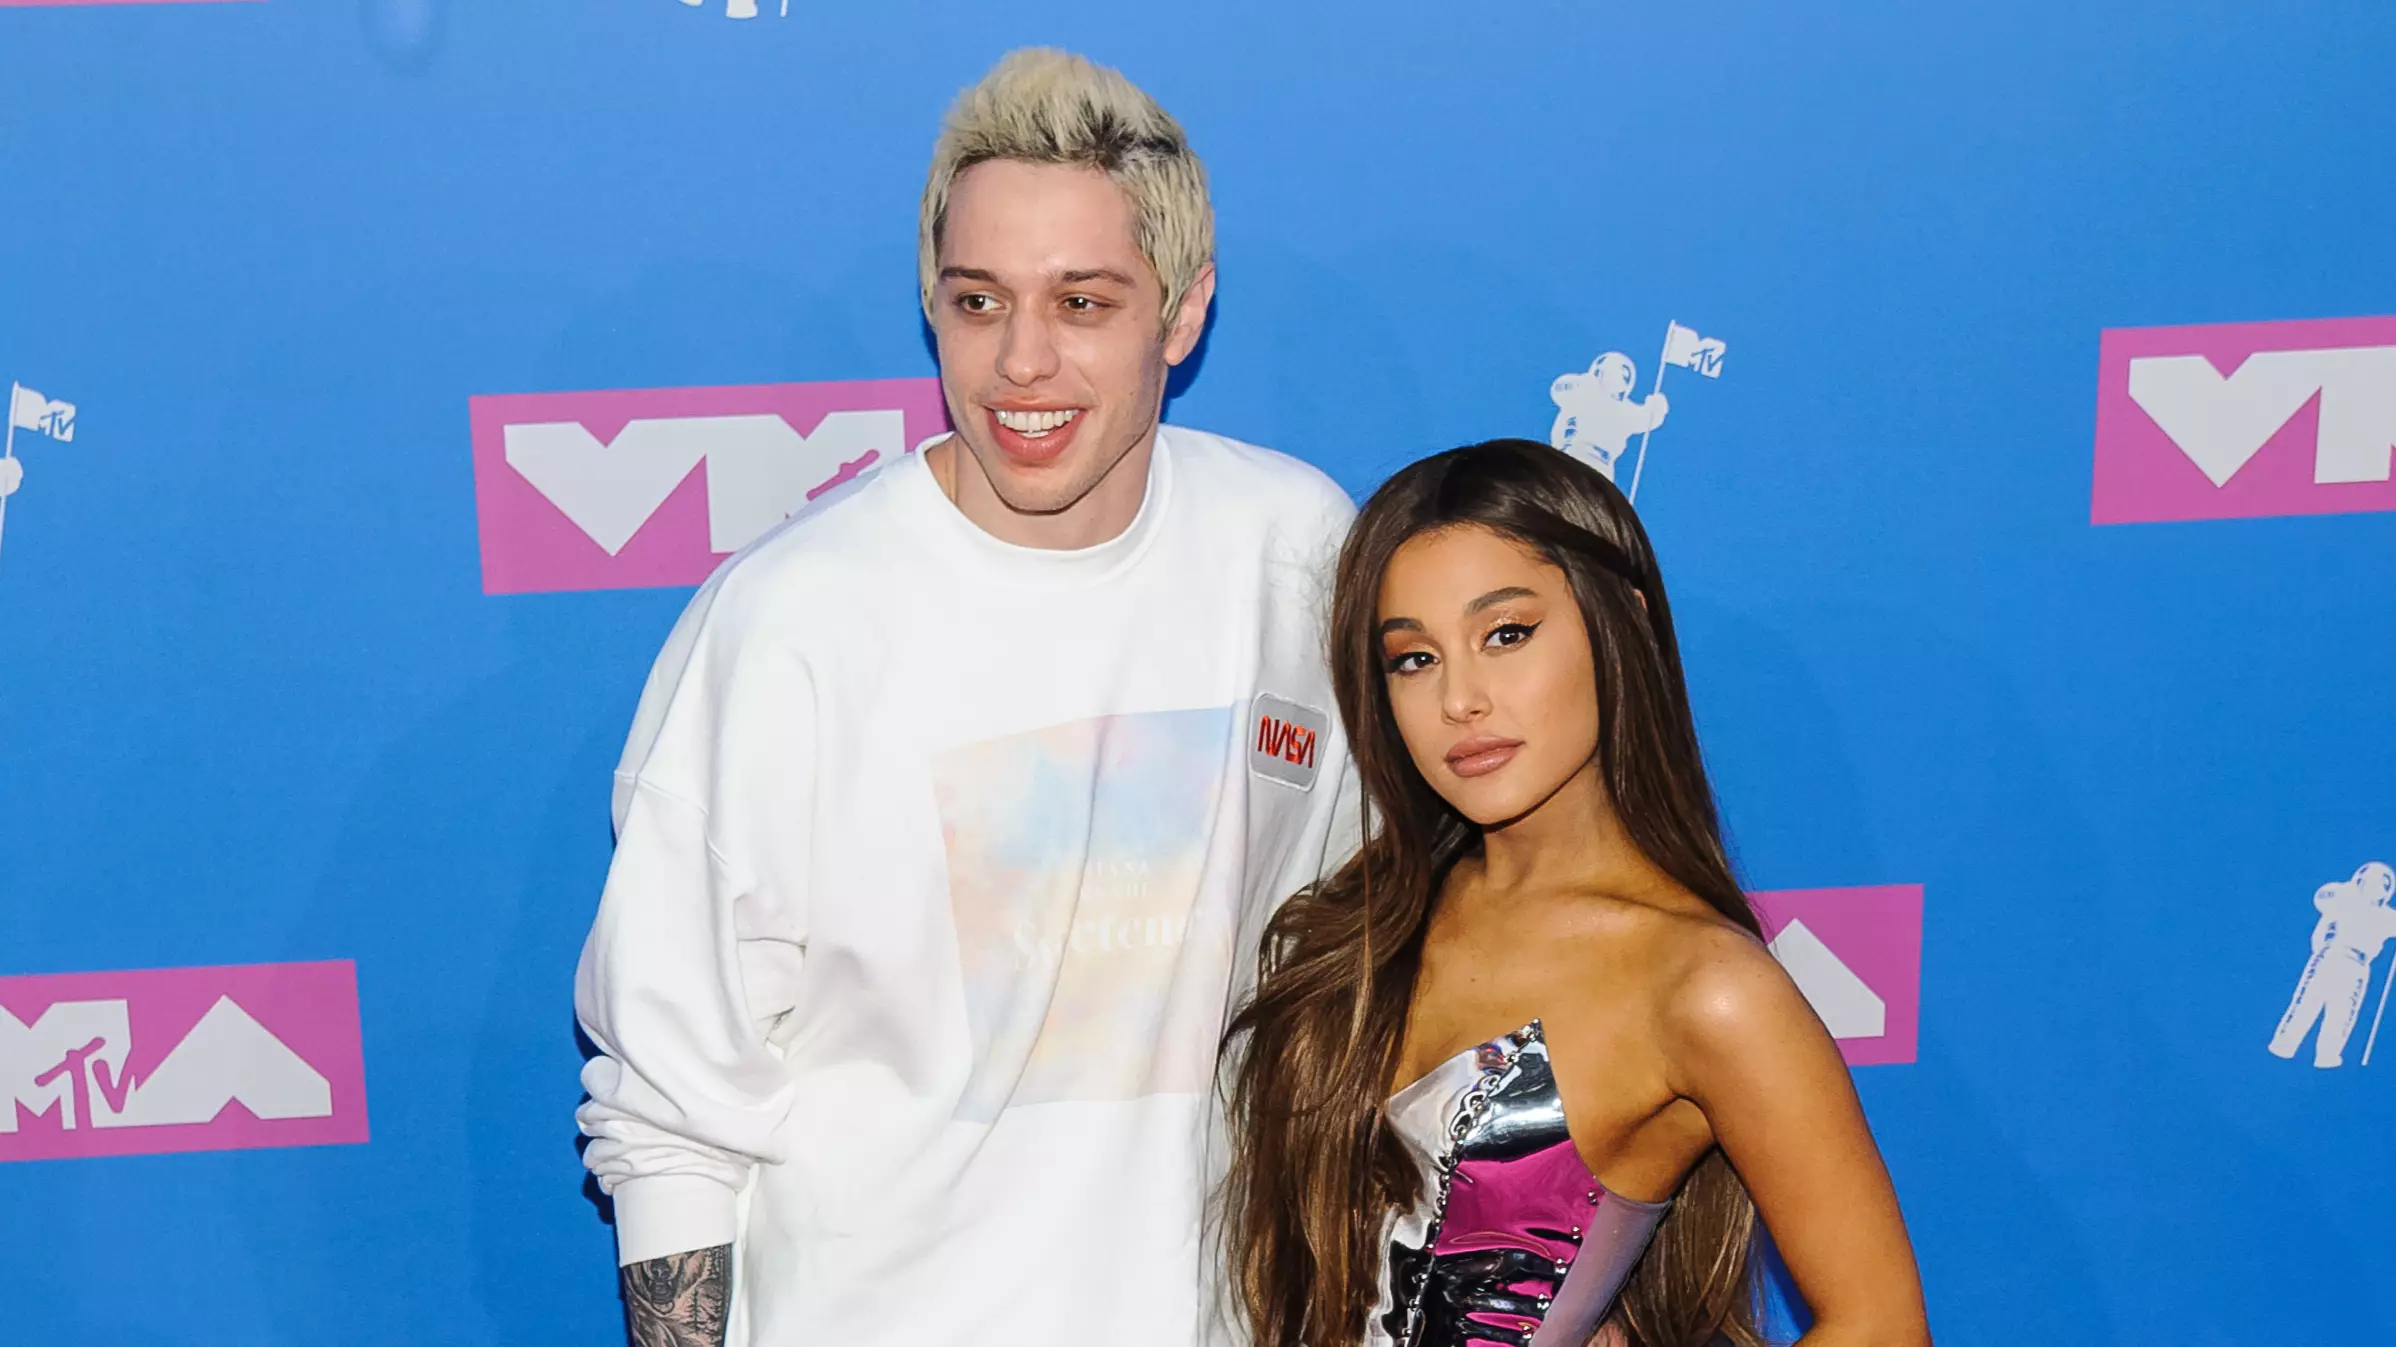 Ariana Grande And Pete Davidson 'Have Split', According To Reports